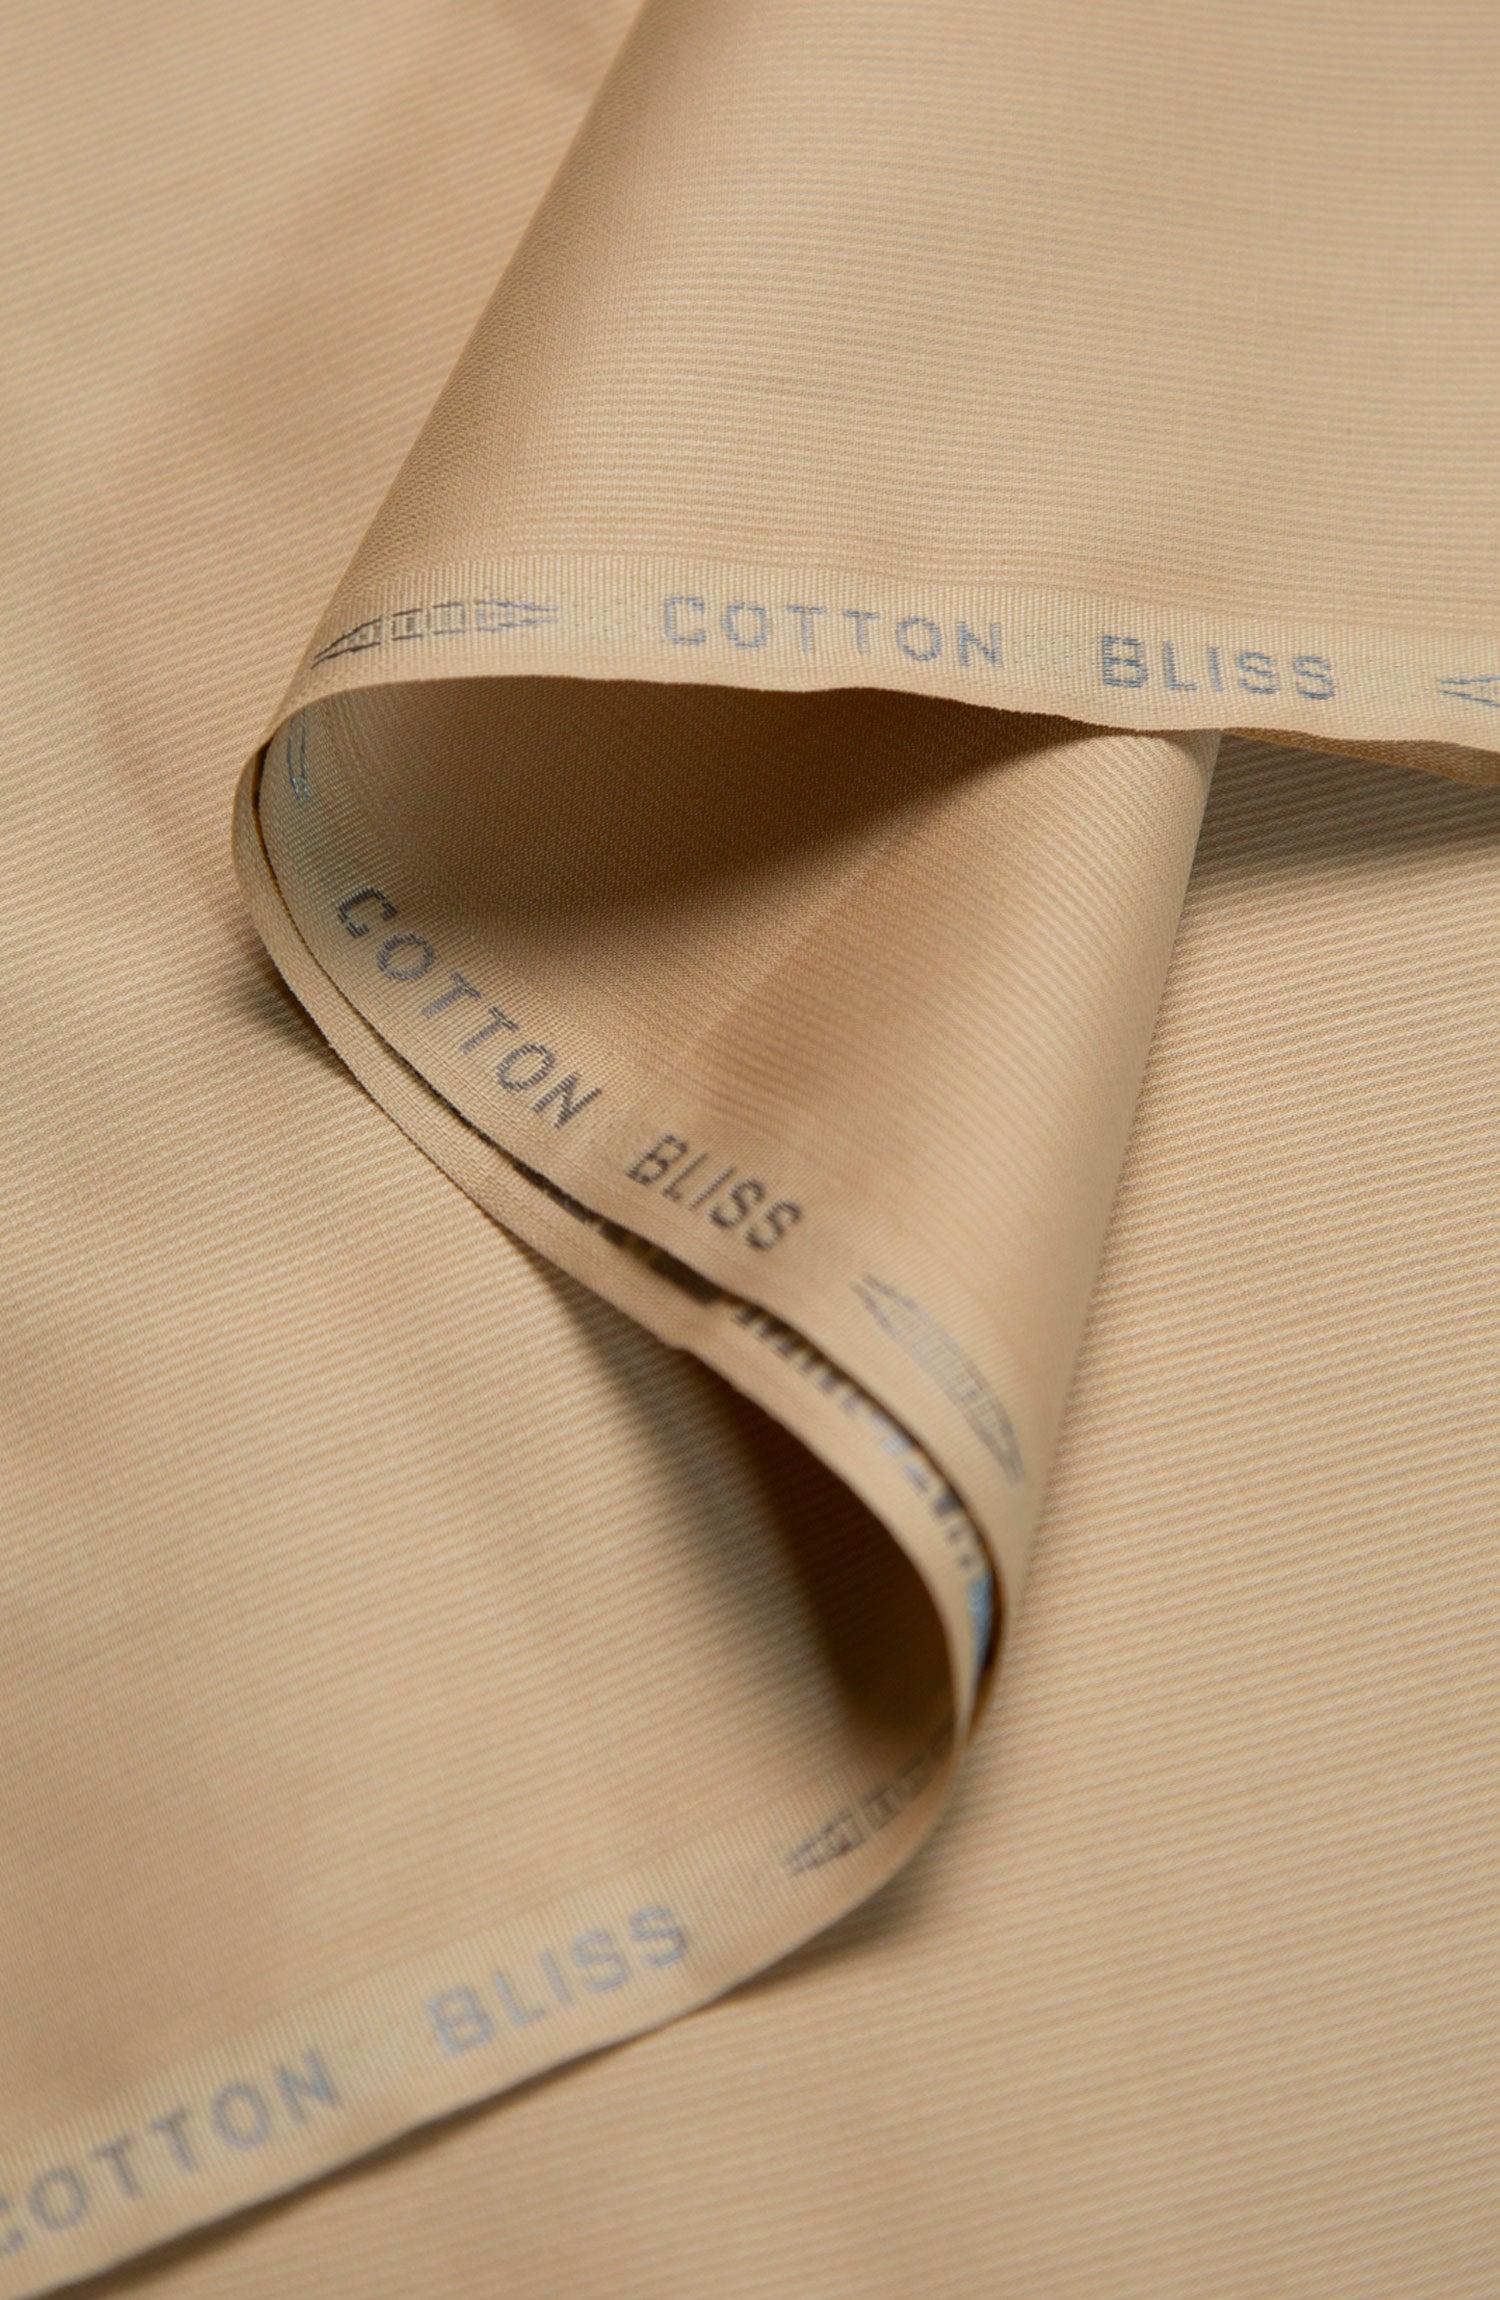 COTTON BLISS, UNDEFINED, CAMBRIDGE, MODJEN FOR THE MODERN GENERATION